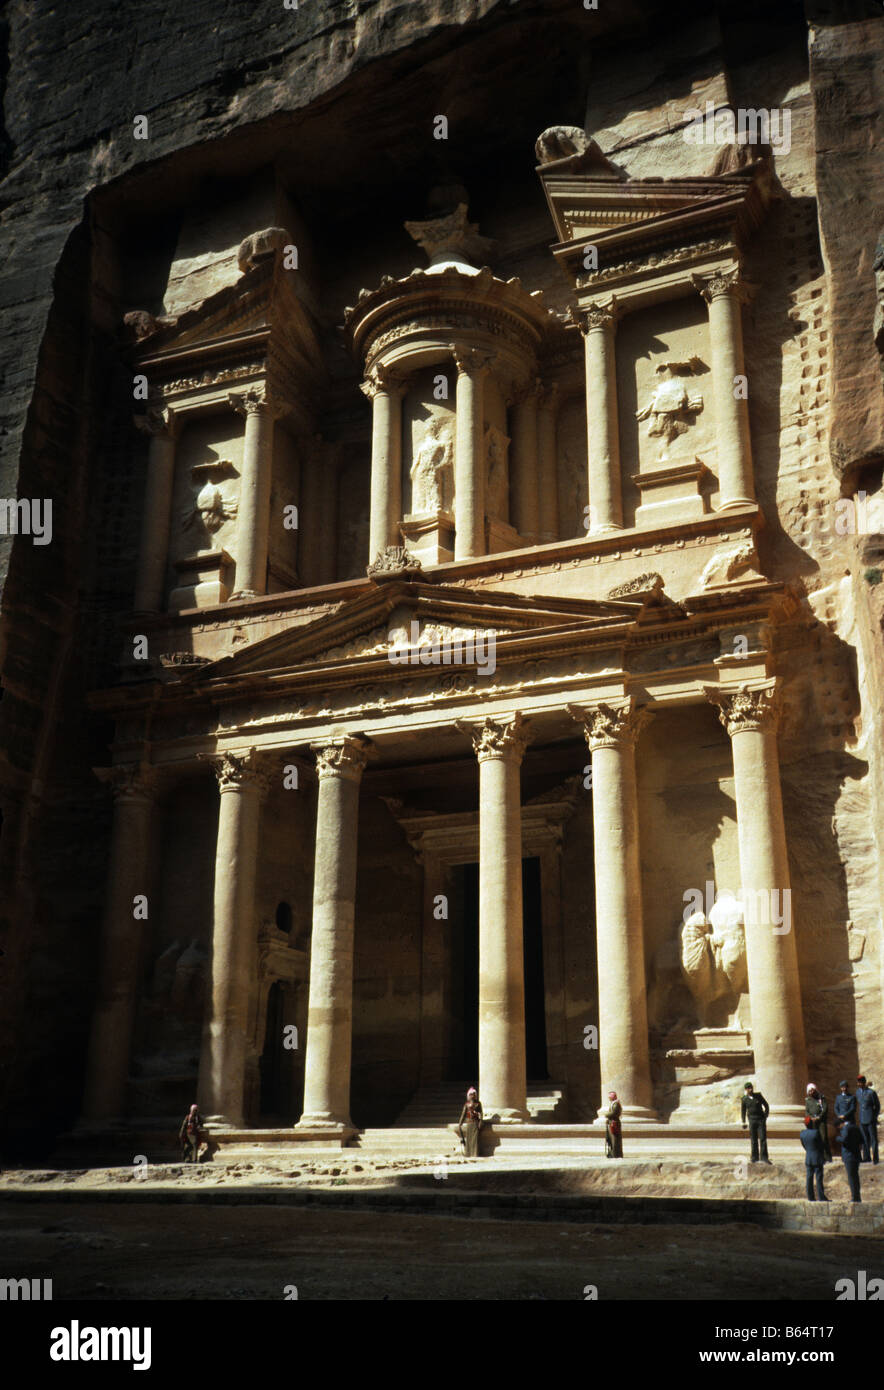 The Treasury in the ancient city of Petra in Jordan 1983 Stock Photo